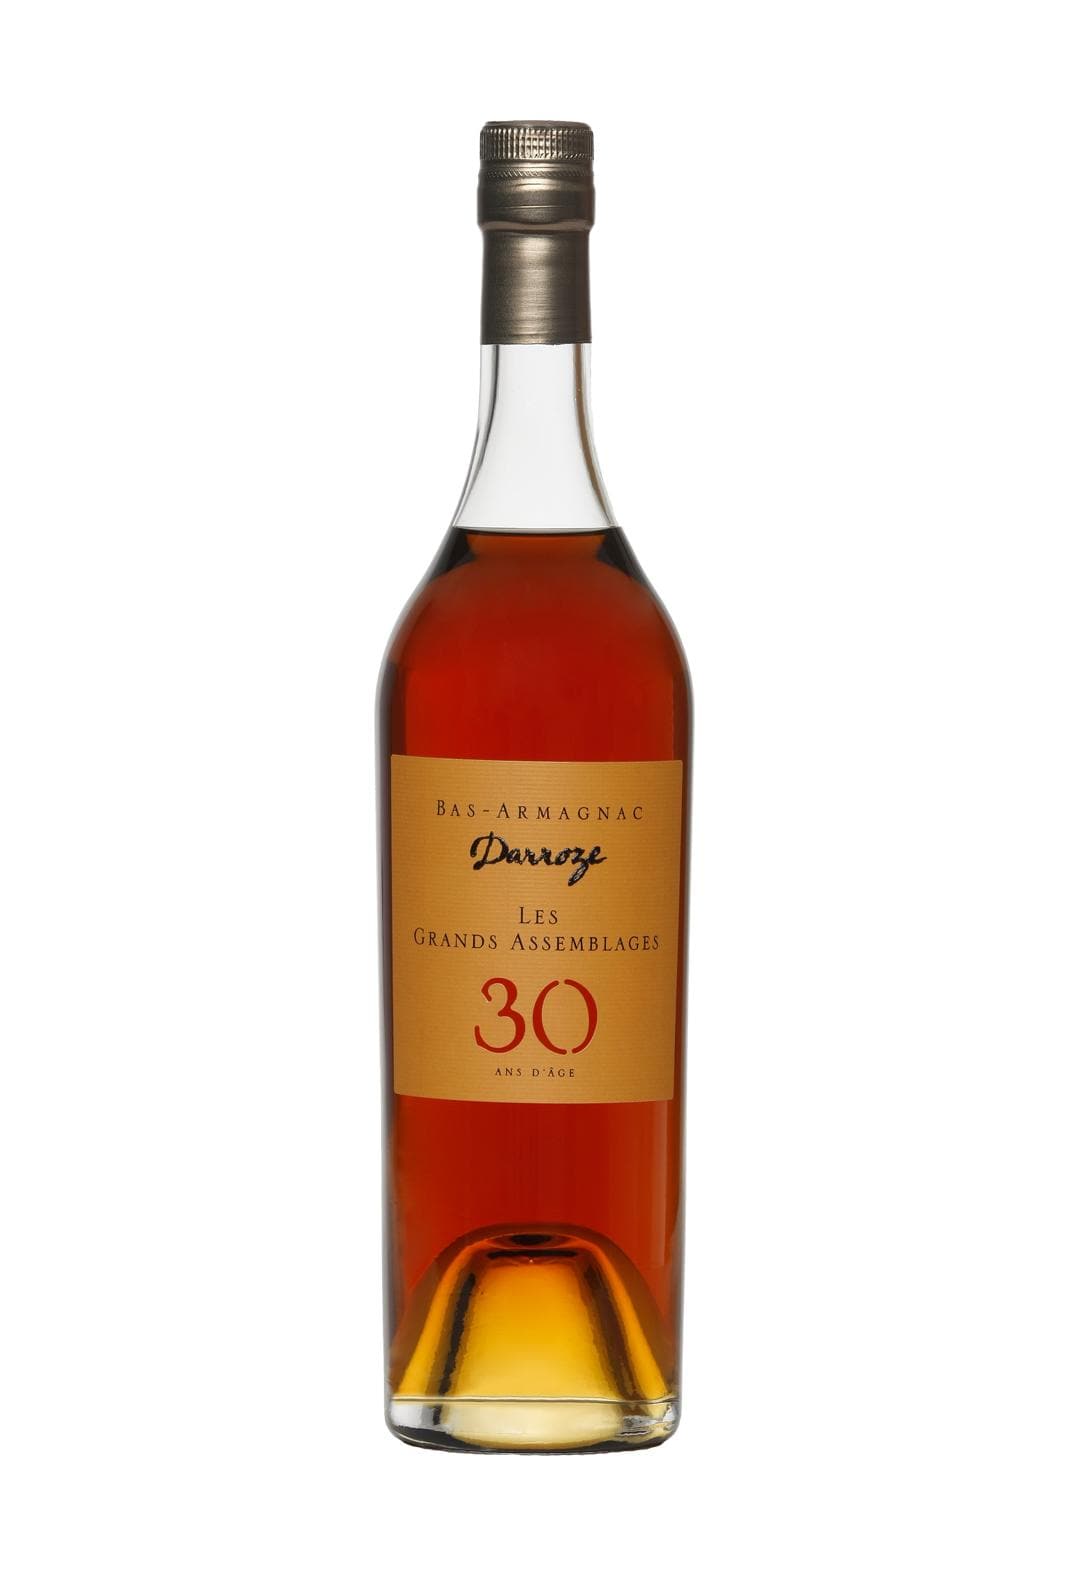 Darroze Grand Bas Armagnac Les Grands Assemblages 30 years 43% 700ml | Brandy | Shop online at Spirits of France